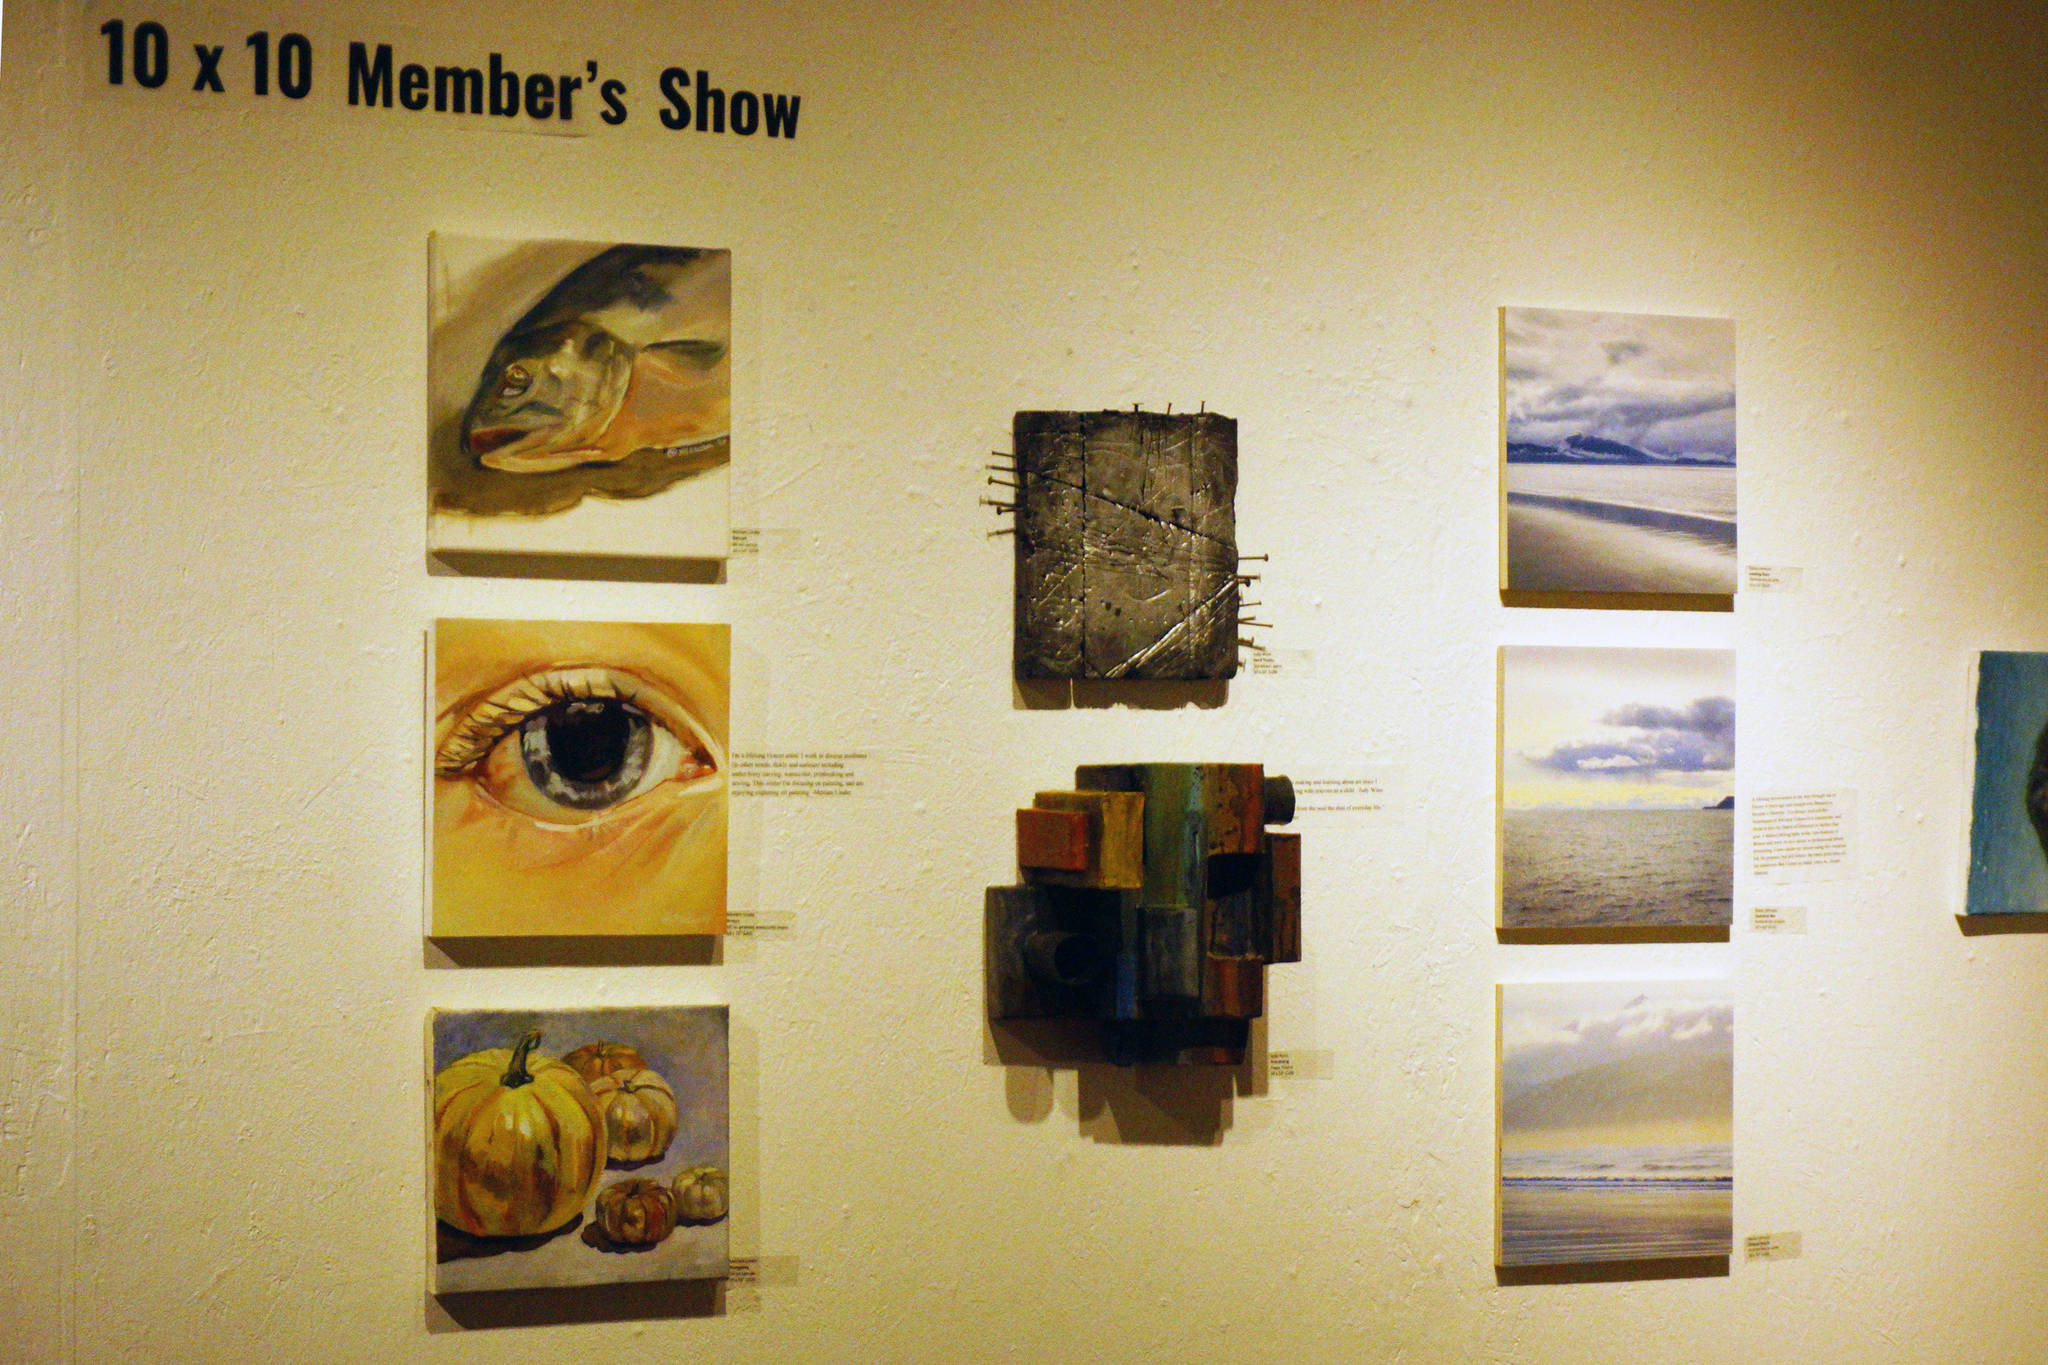 Some of the works in Bunnell Street Arts Center’s 10x10 show in Homer, Alaska. (Photo by Michael Armstrong/Homer News)